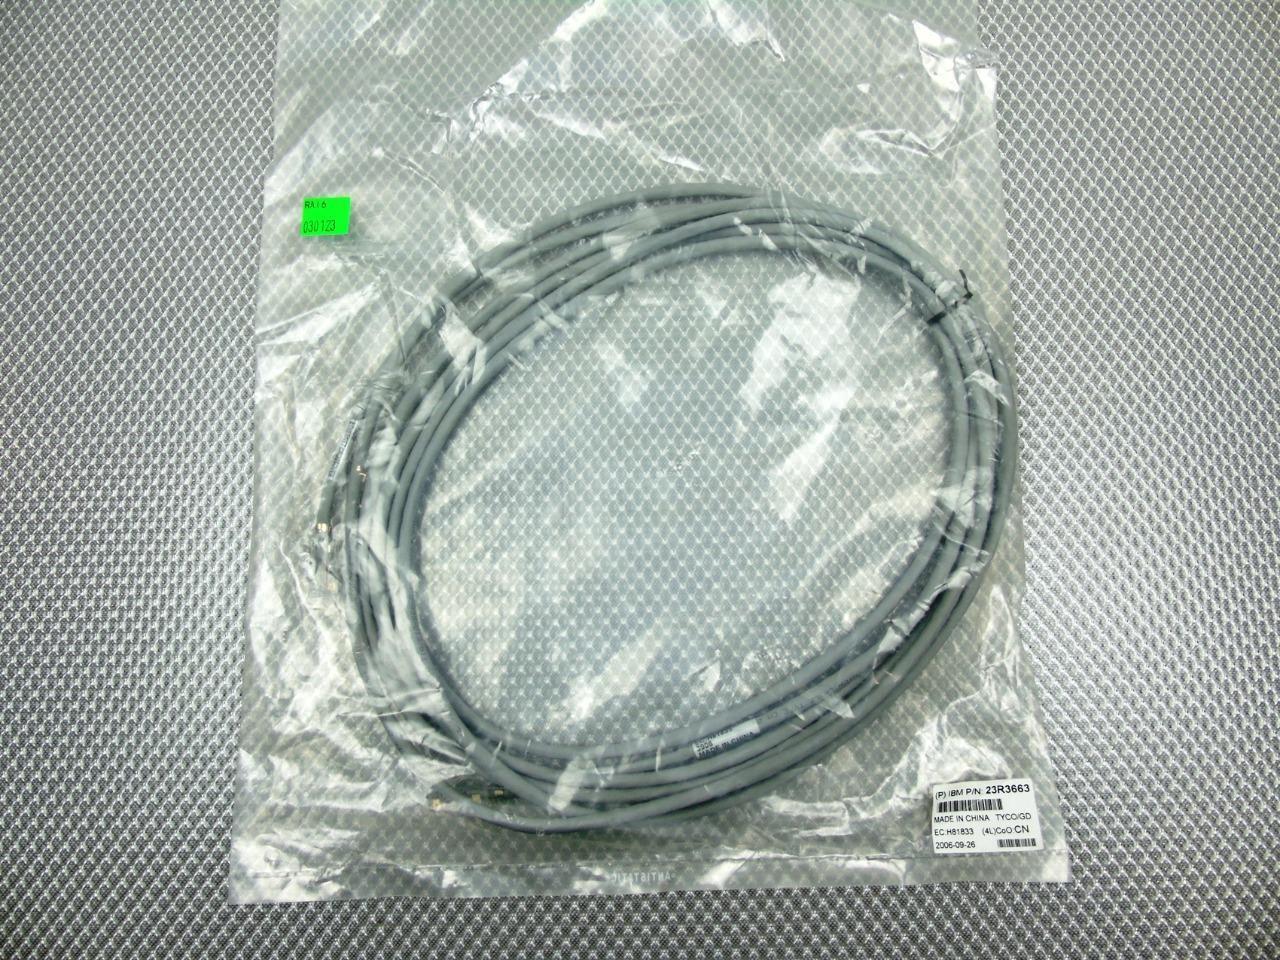 New IBM Ethernet Crossover Cable - IBM P/N: 23R3663